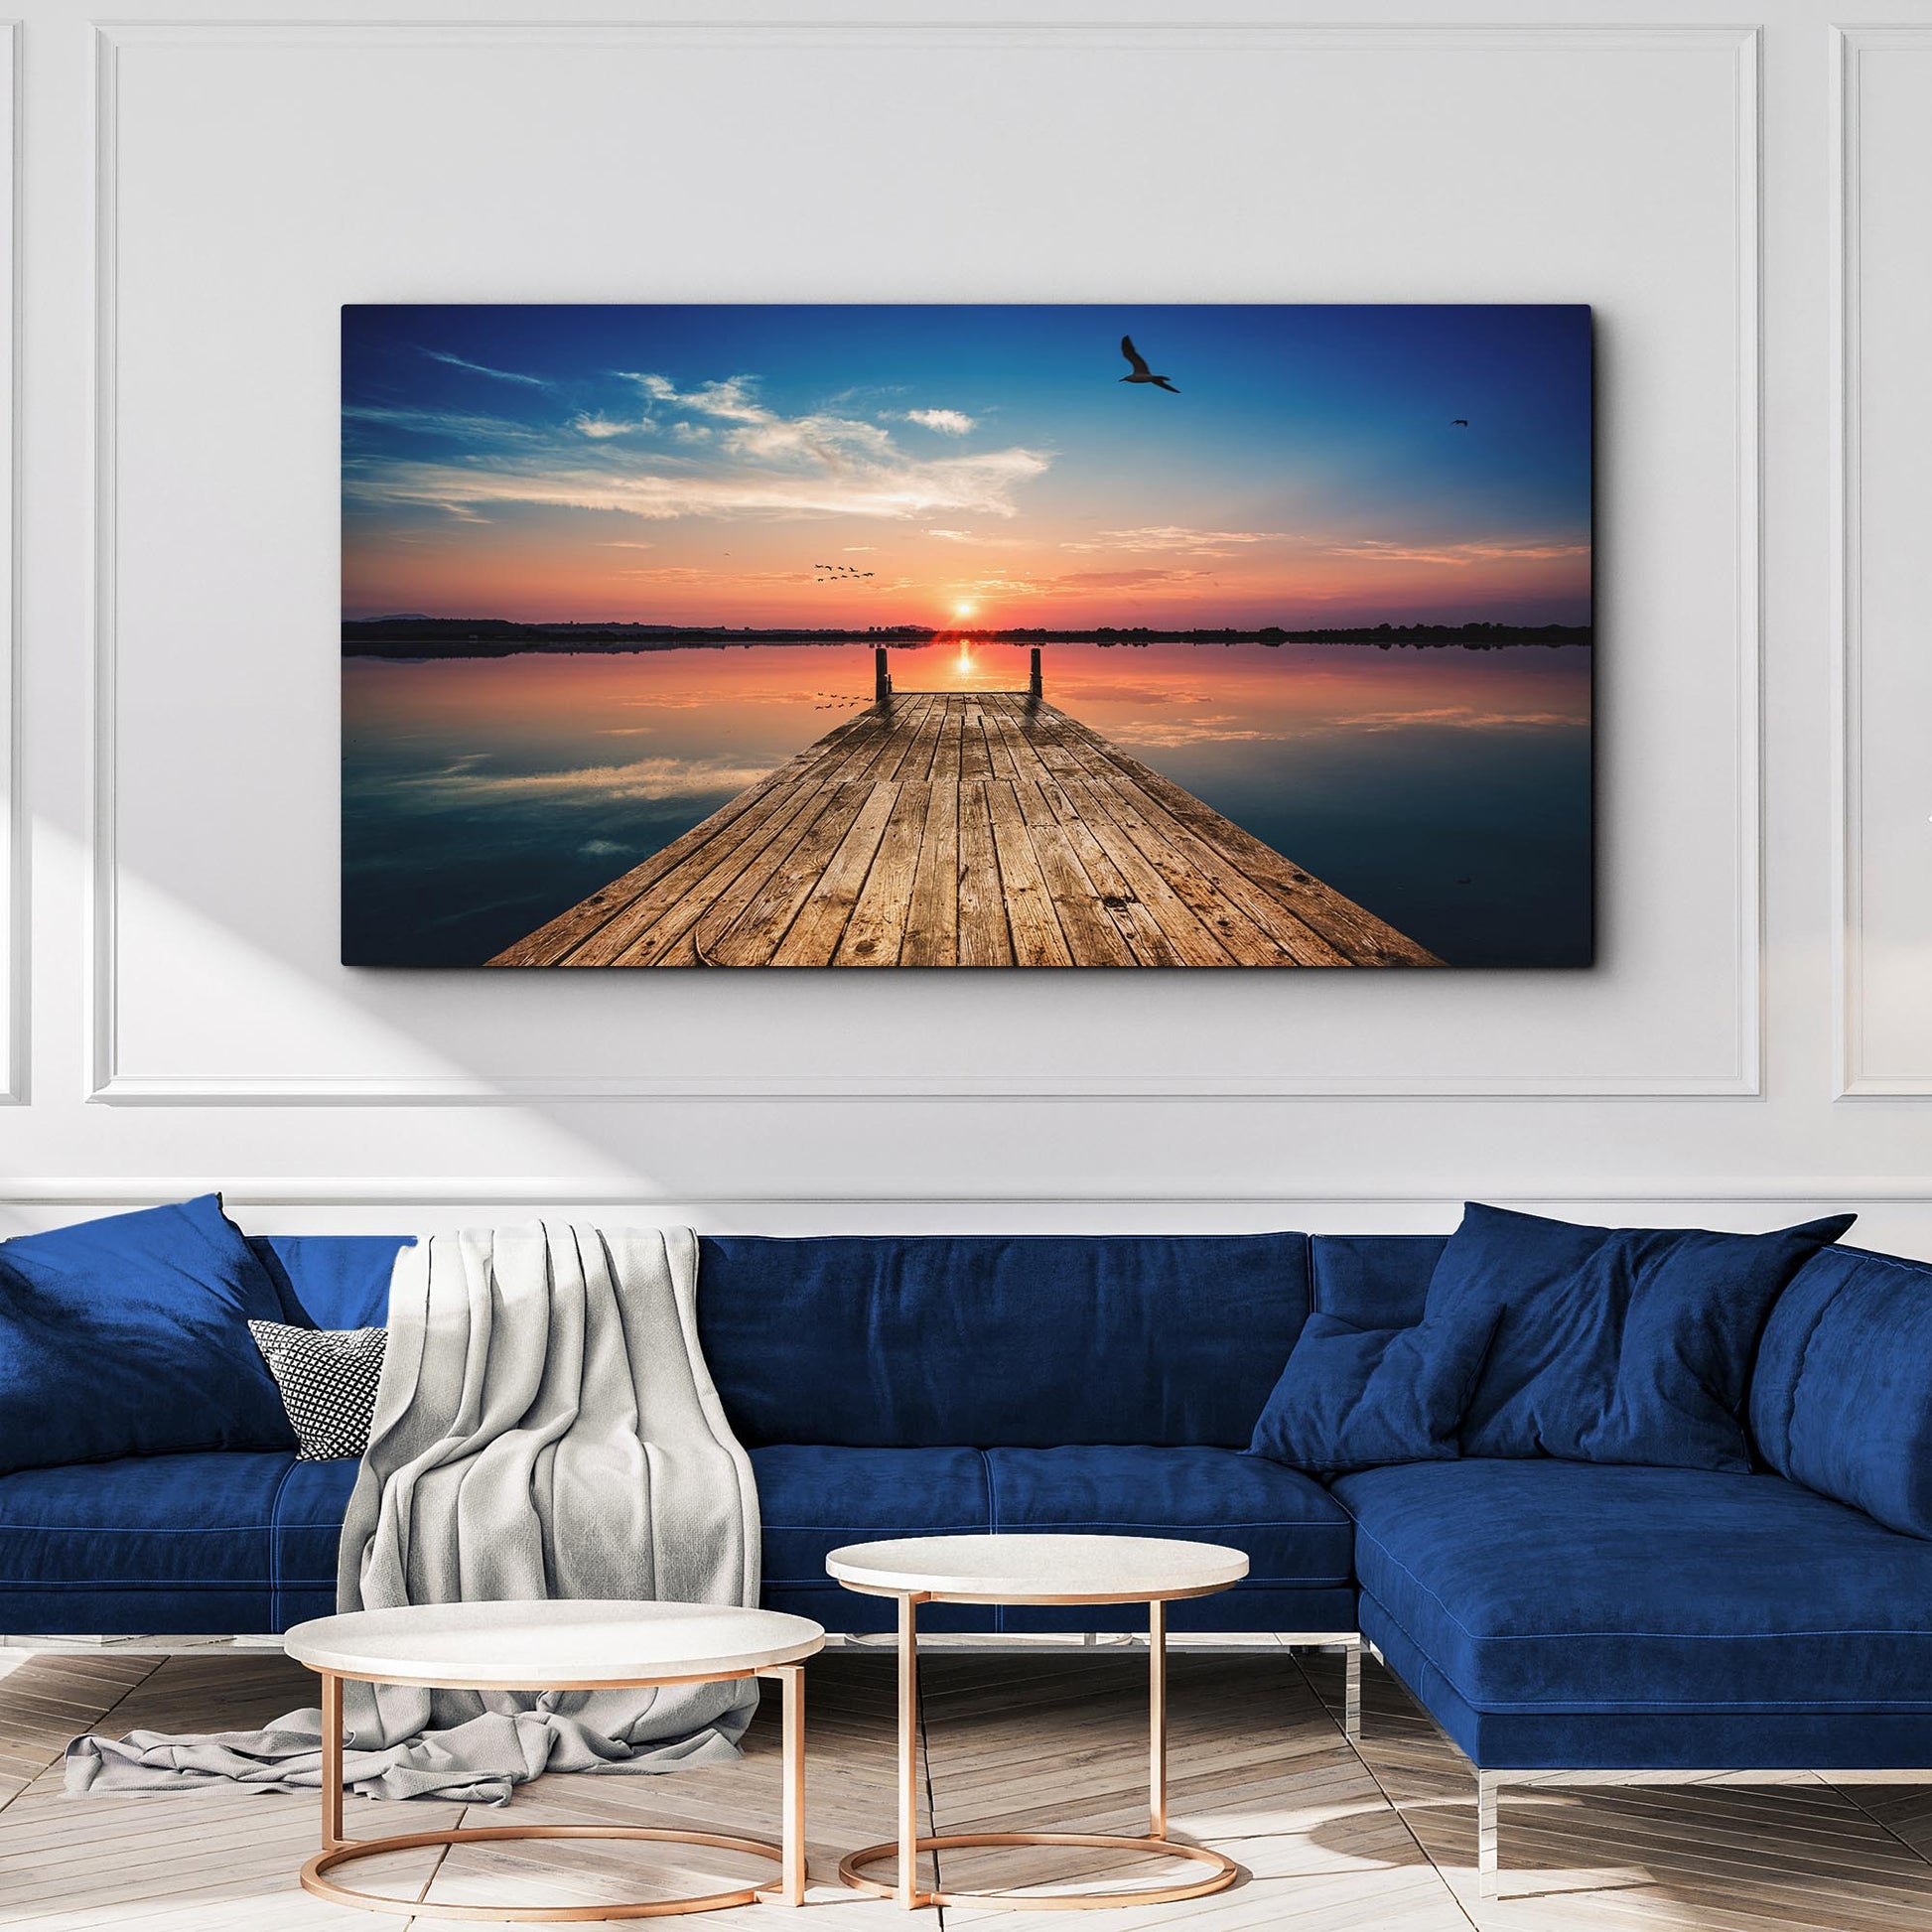 Sunset View At Beach Pier Canvas Wall Art Style 2 - Image by Tailored Canvases